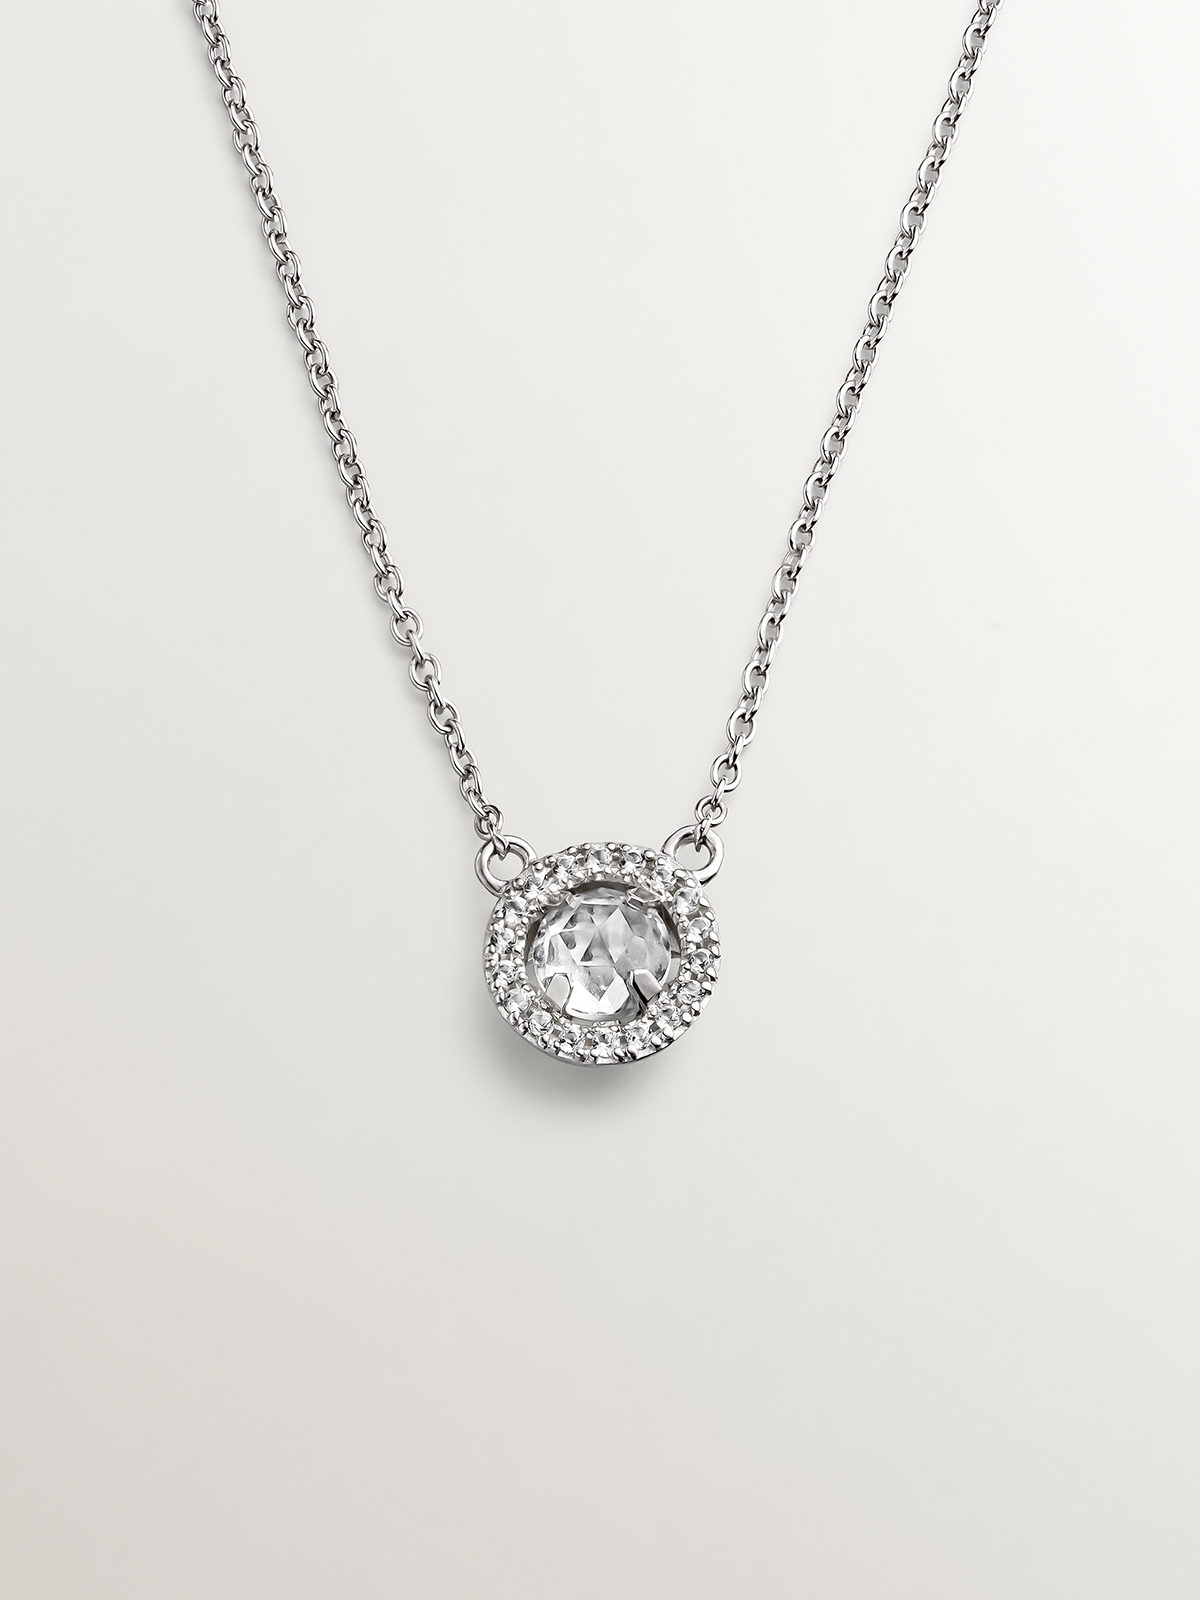 925 Silver Pendant with white topaz and border of white sapphires.